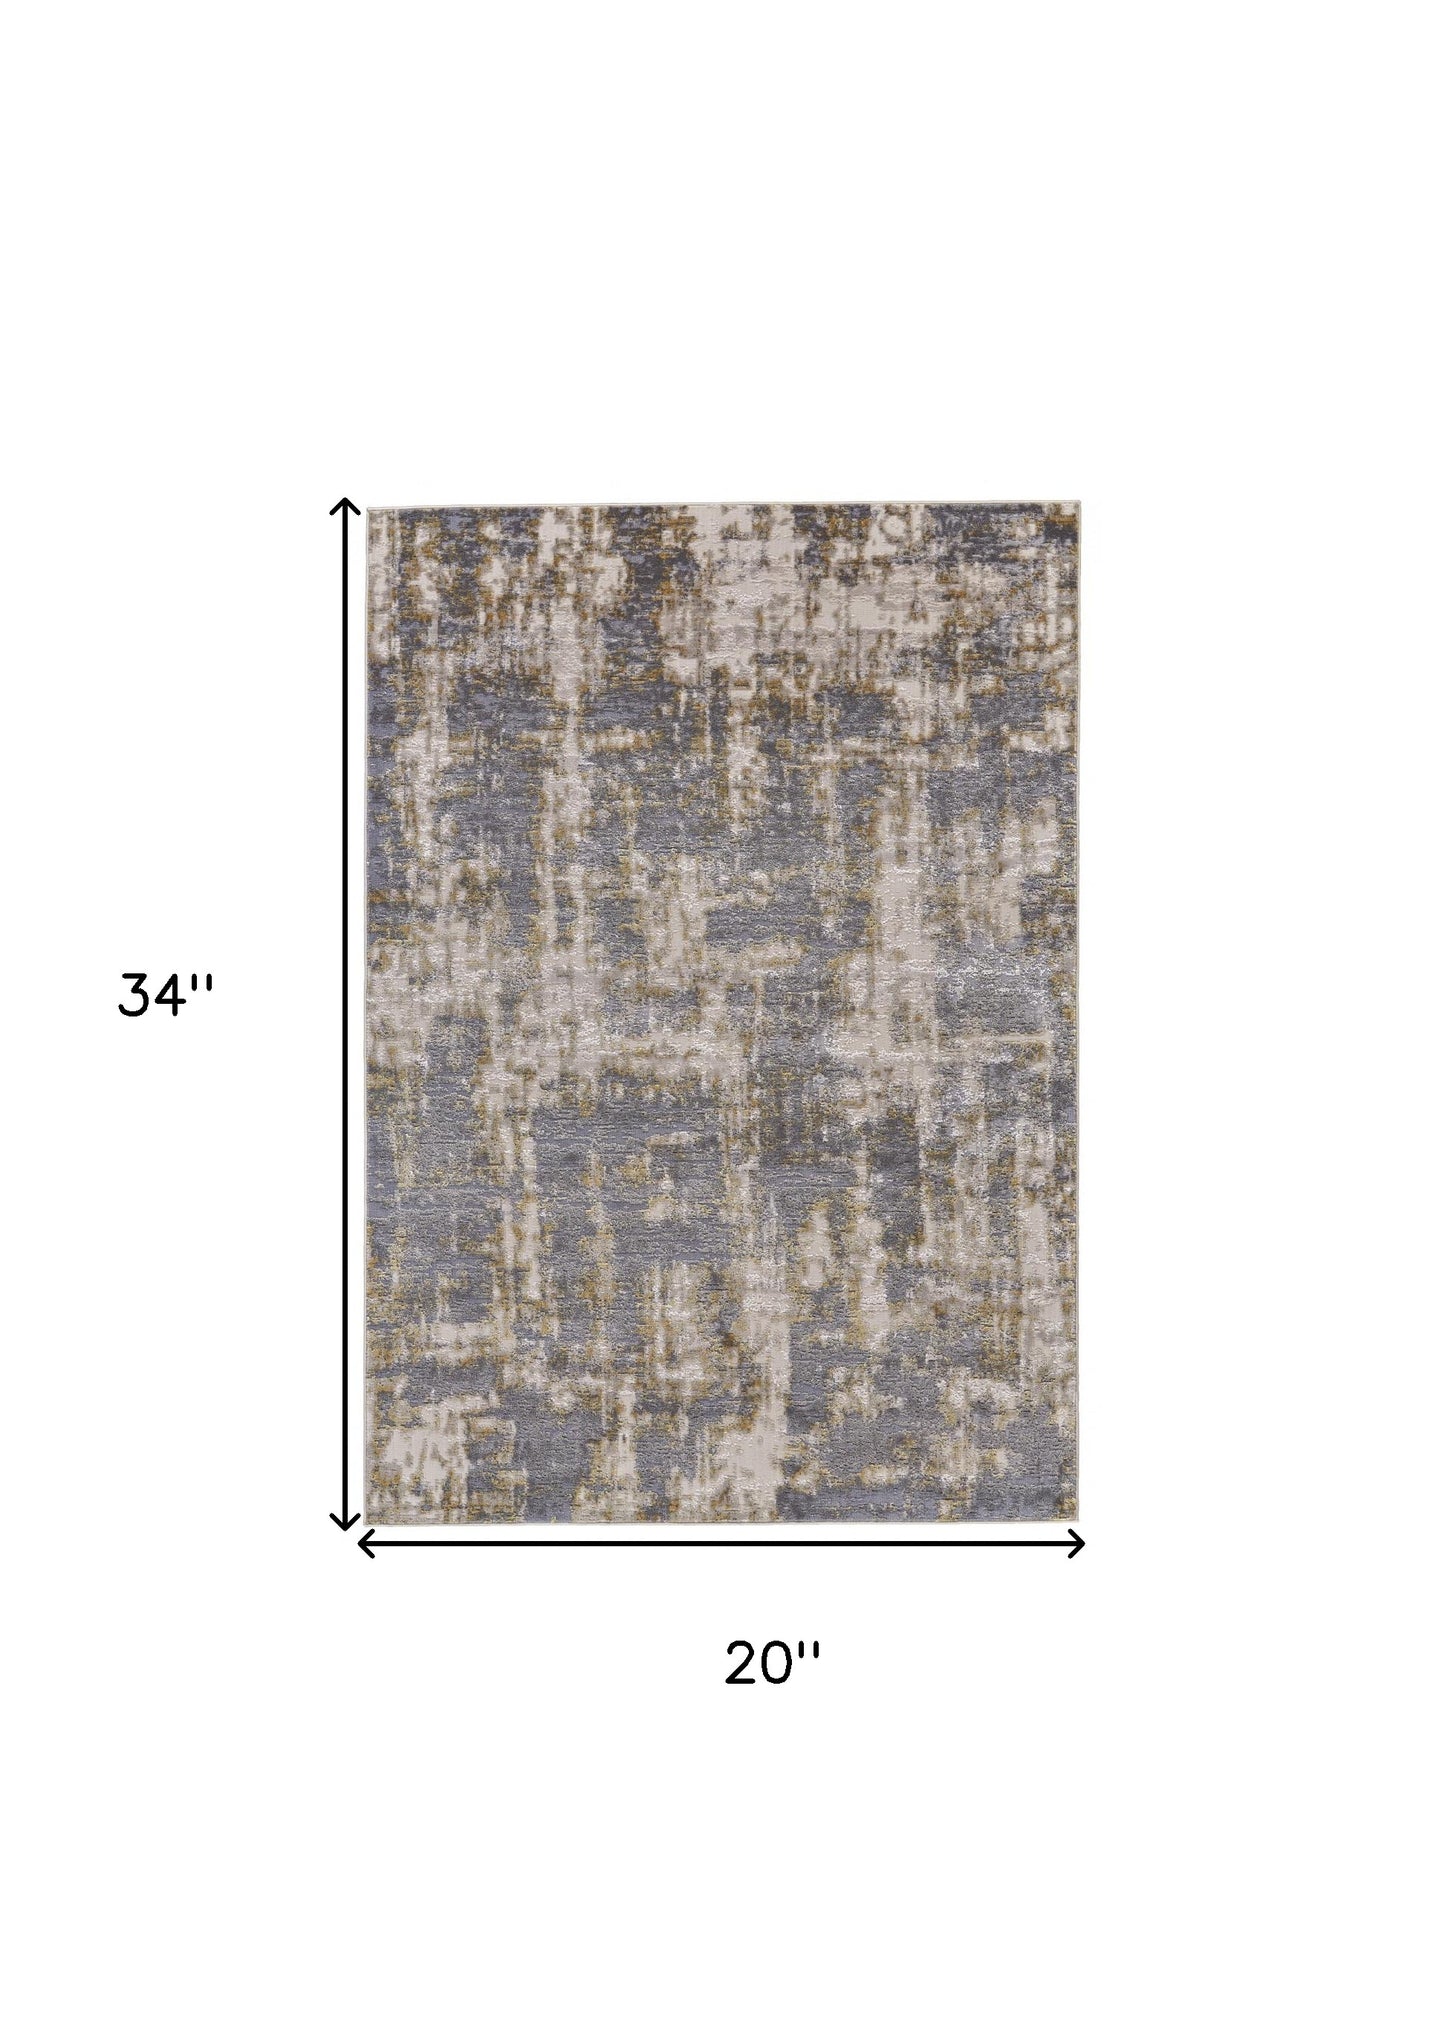 12' X 15' Gray And Gold Abstract Area Rug